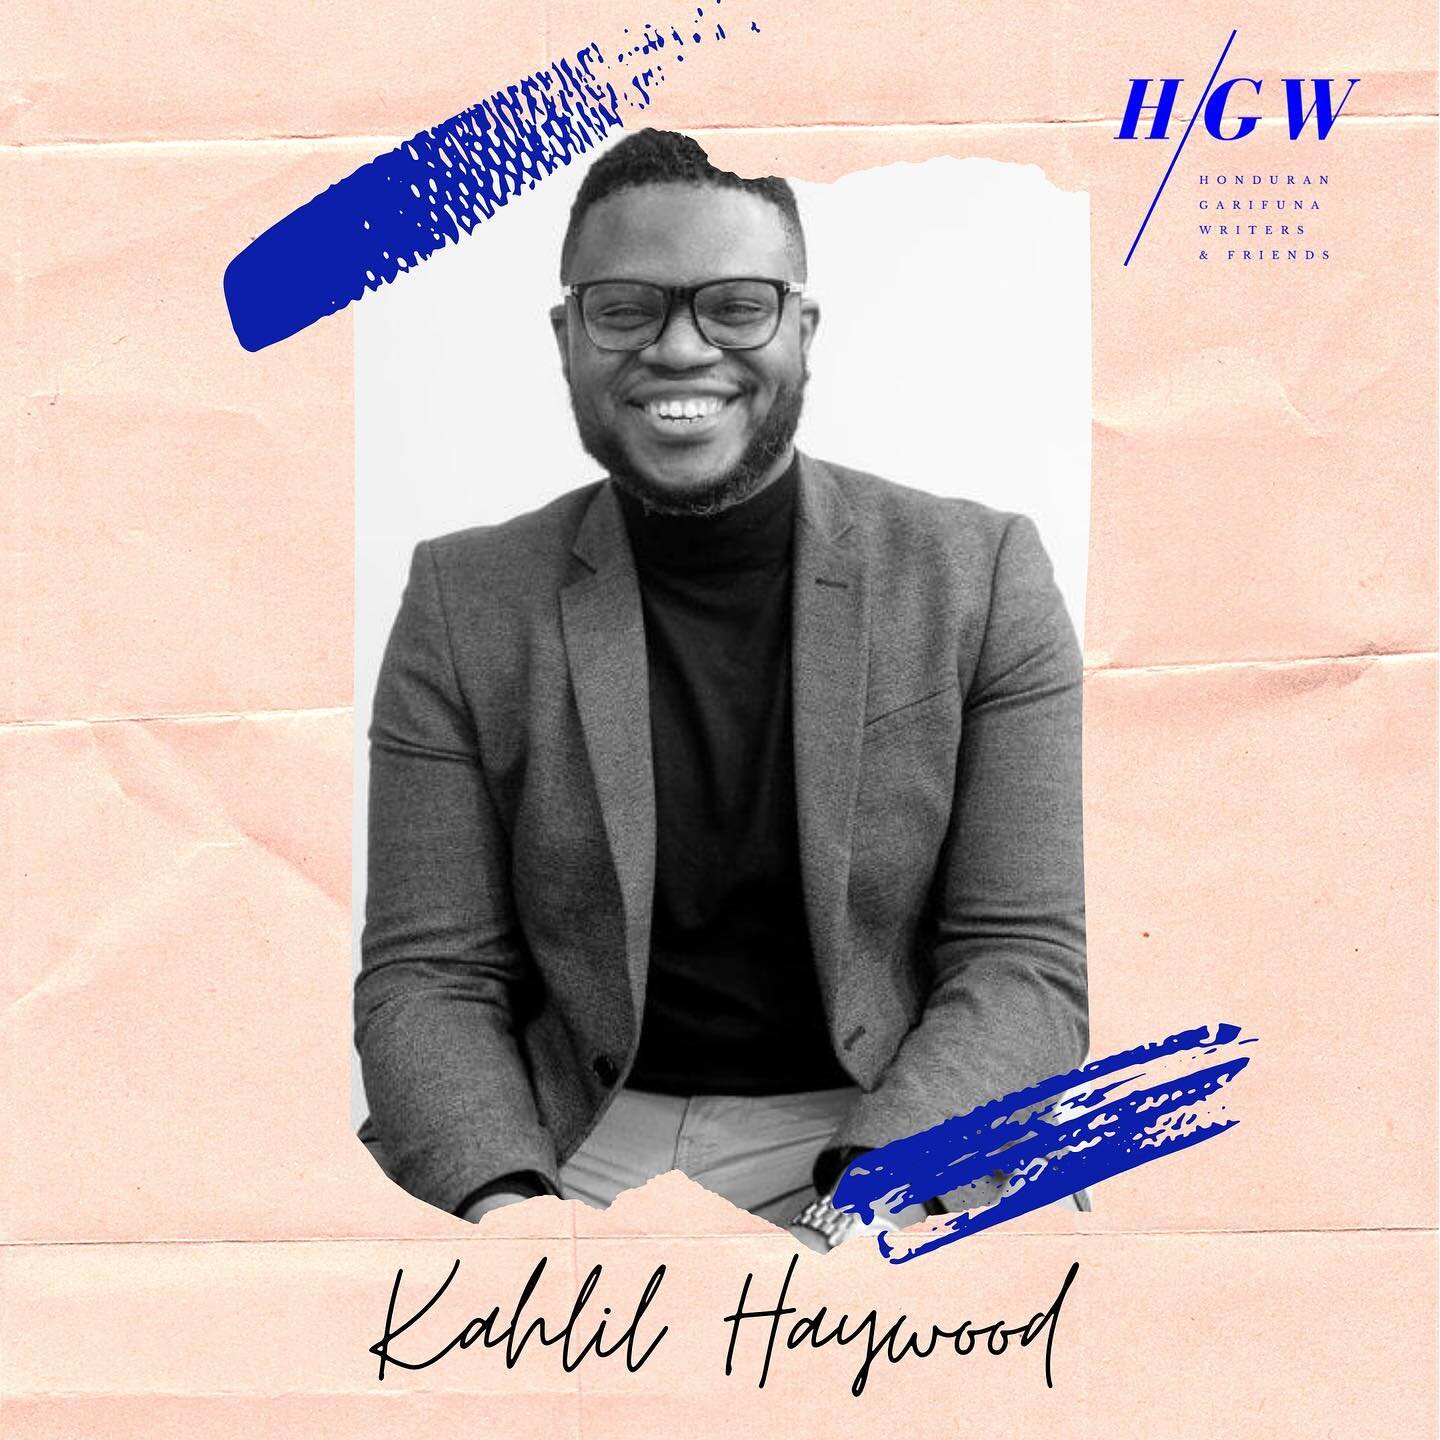 Kahlil Haywood is a writer, editor and content creator from Brooklyn, NY. Prideful about his candor, Kahlil started his blog &ldquo;Damn, He Got A Point&rdquo; in undergrad in 2009. A column with its namesake began in 2010 for the LIU Post Pioneer Ne